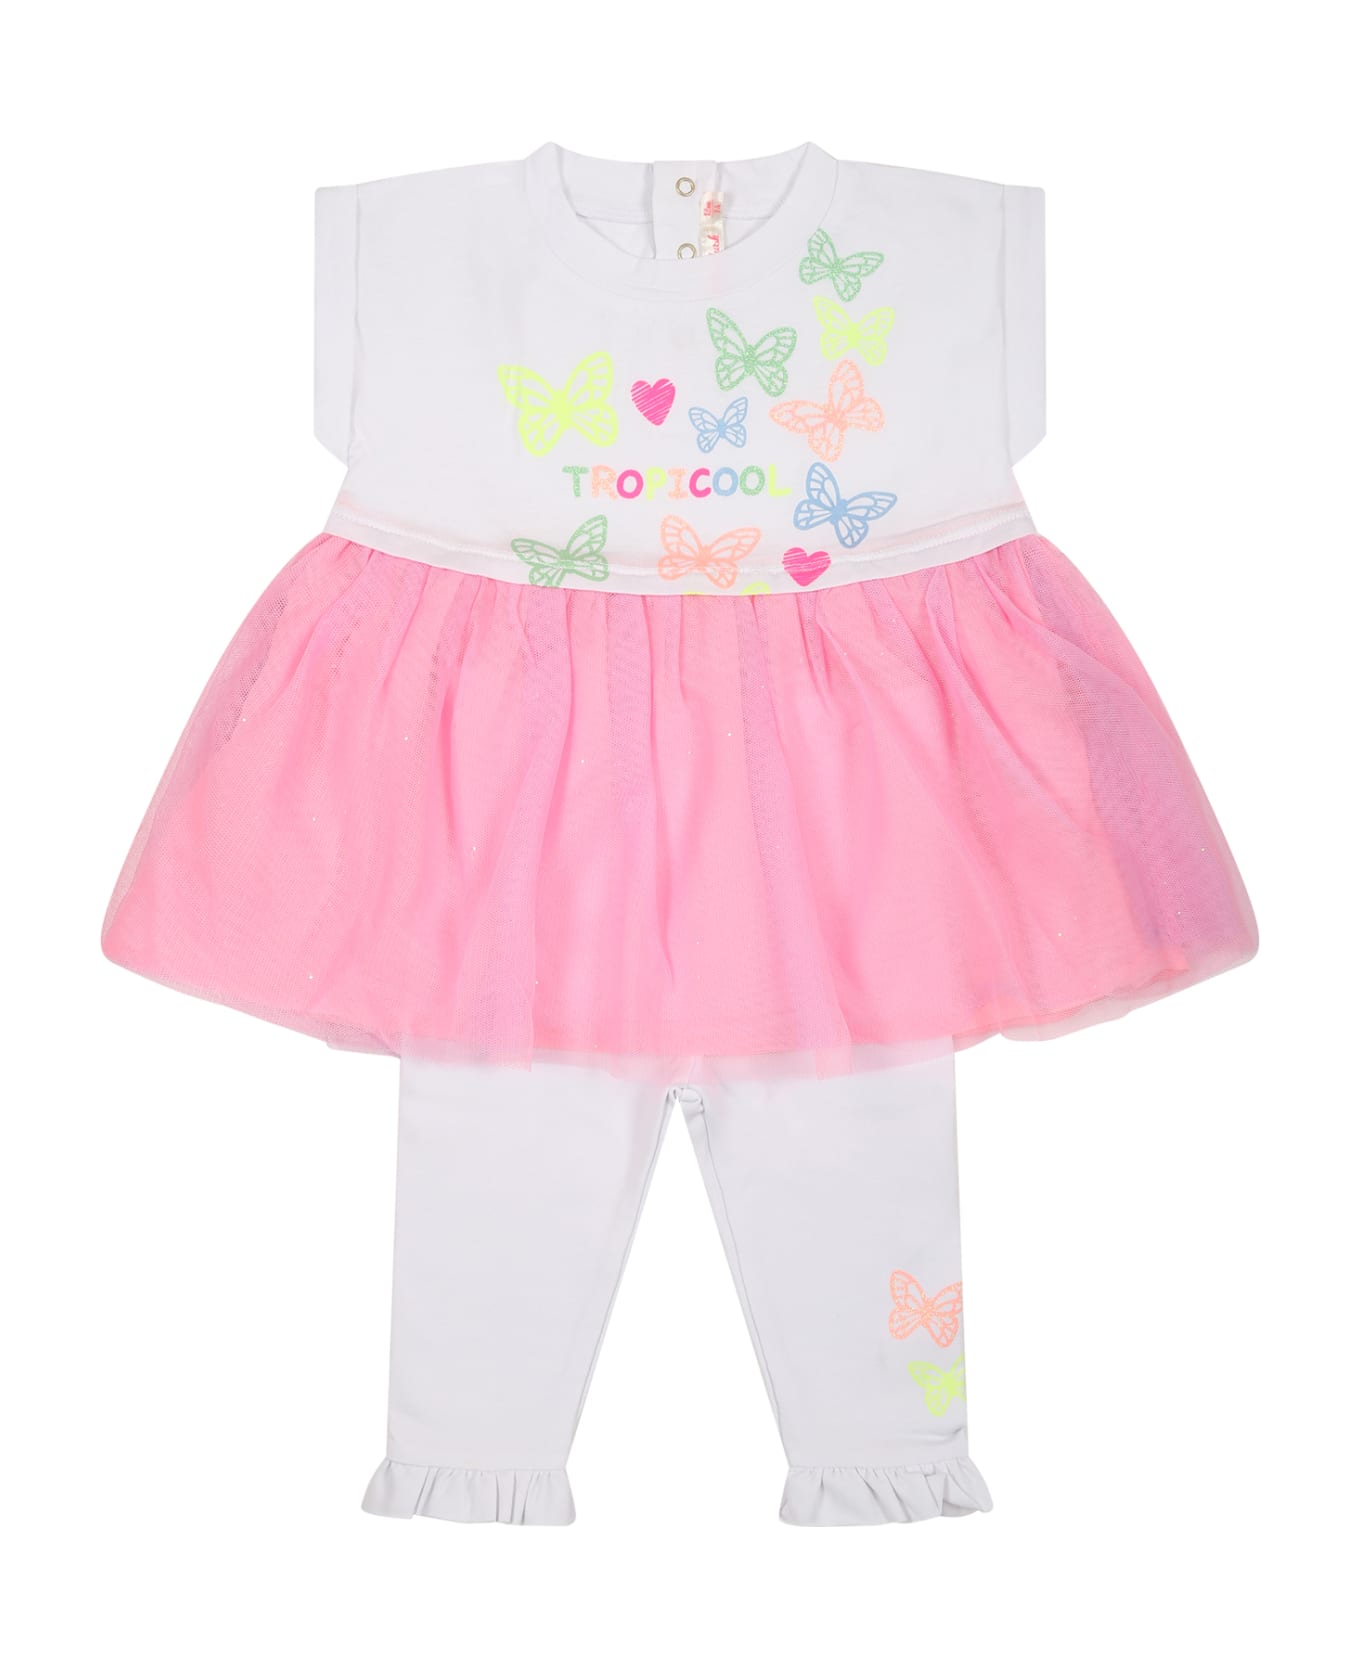 Billieblush White Suit For Baby Girl With Butterflies And Hearts - White ボトムス